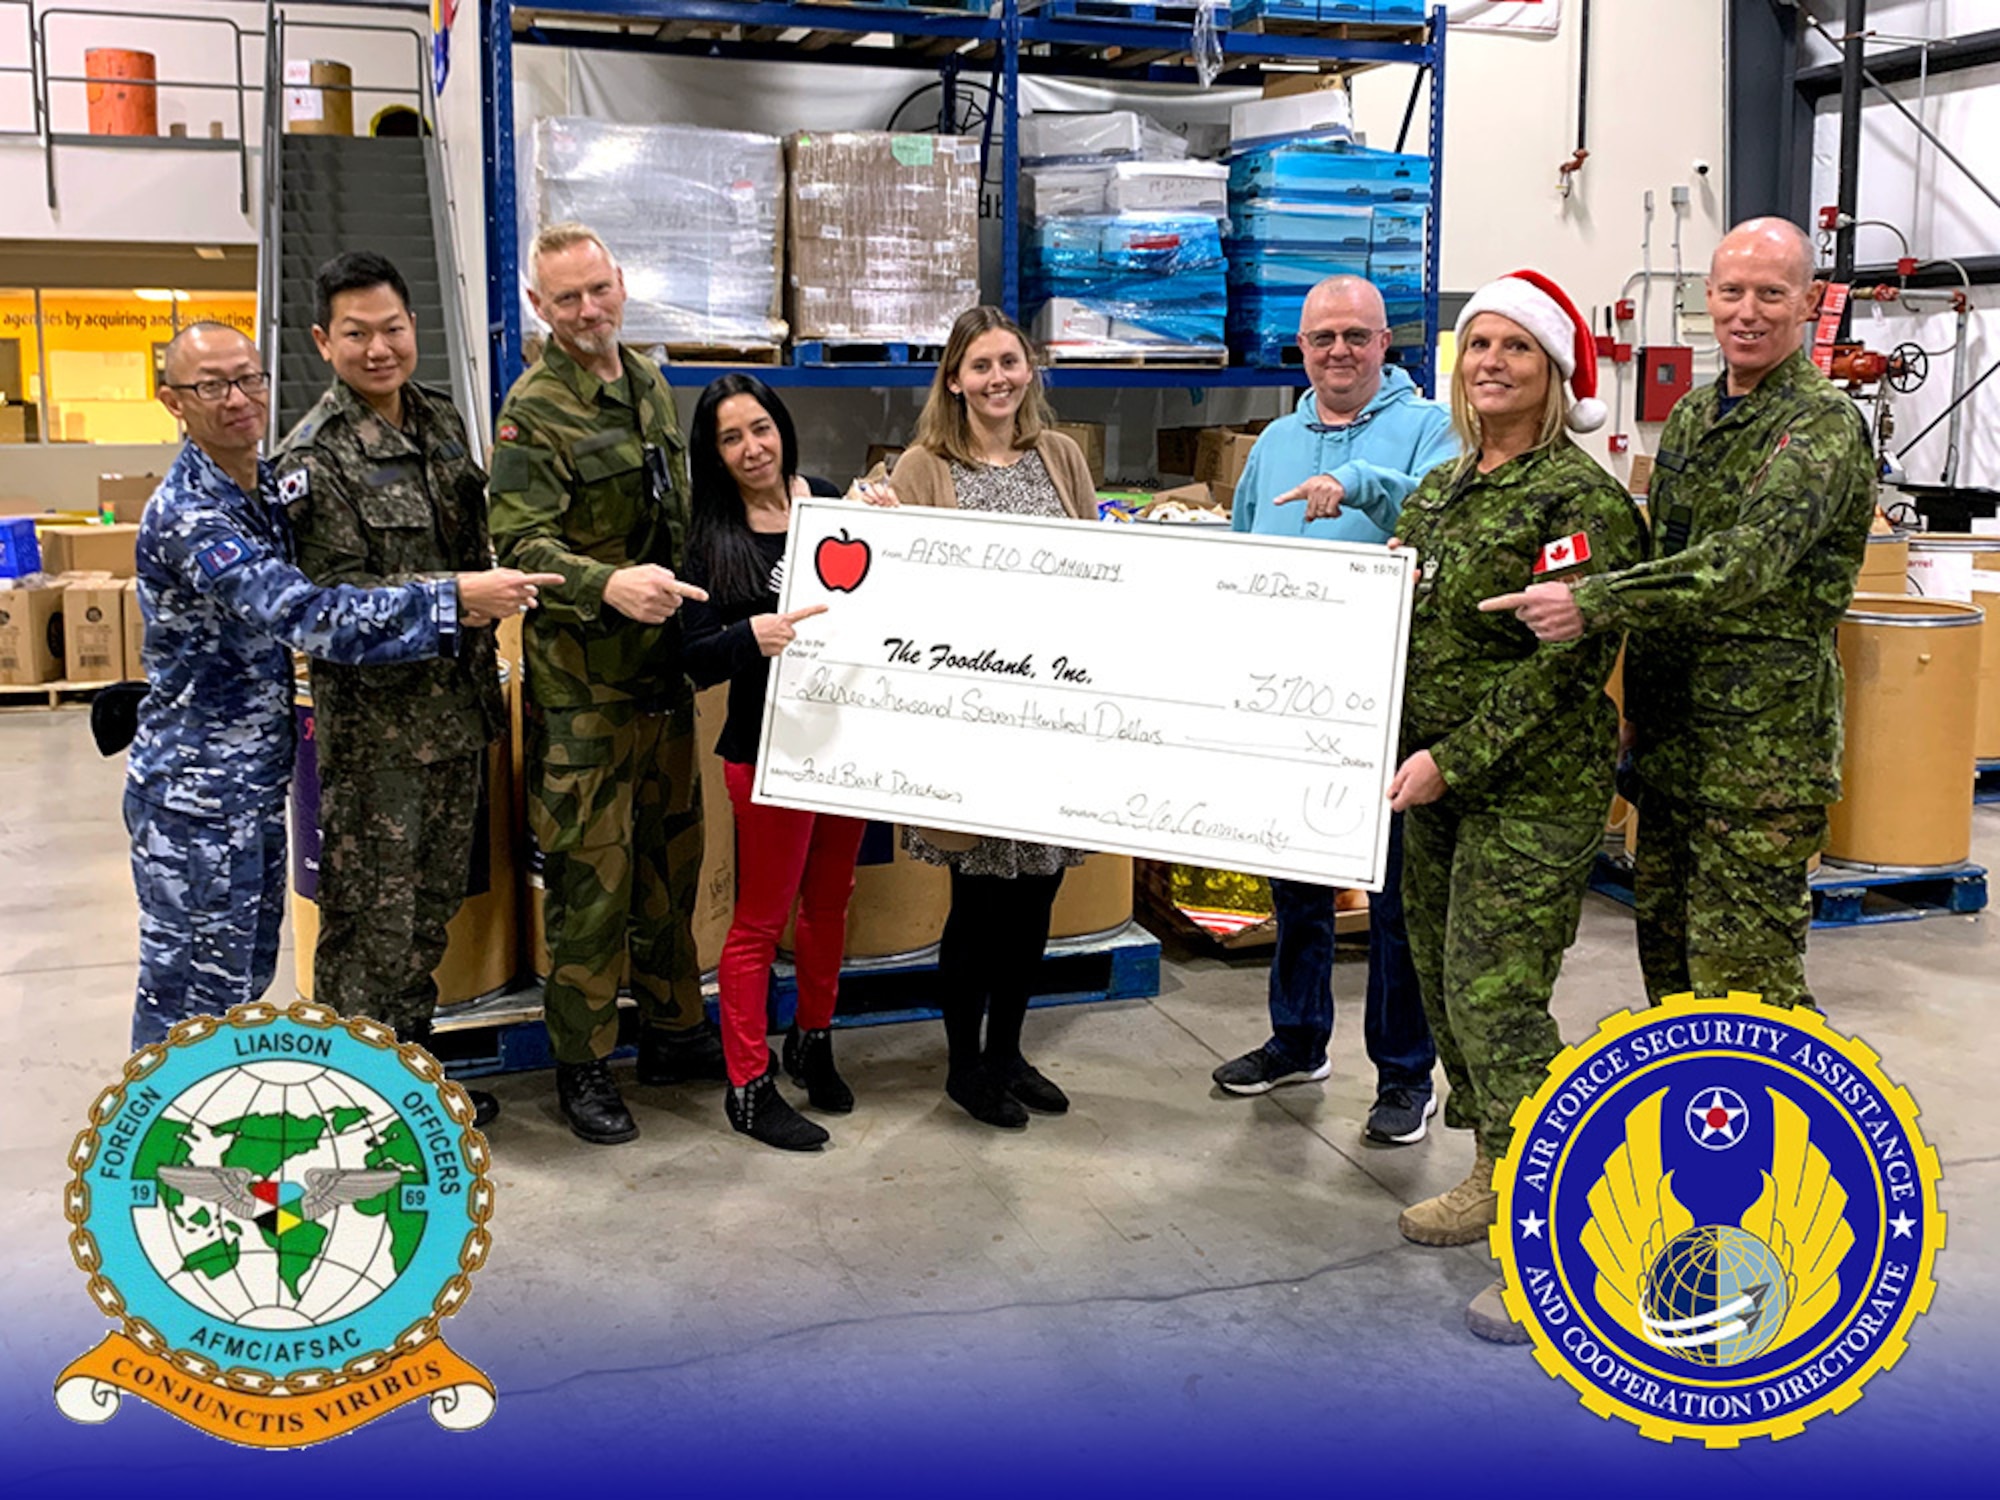 AFSAC representatives and international partners from Australia, Canada, Norway, and South Korea were able to be present for a donation to the Dayton Foodbank. Not in picture is more than 15 other countries’ FLOs who participated in the community service initiative (Graphic: Jonathan Tharp).